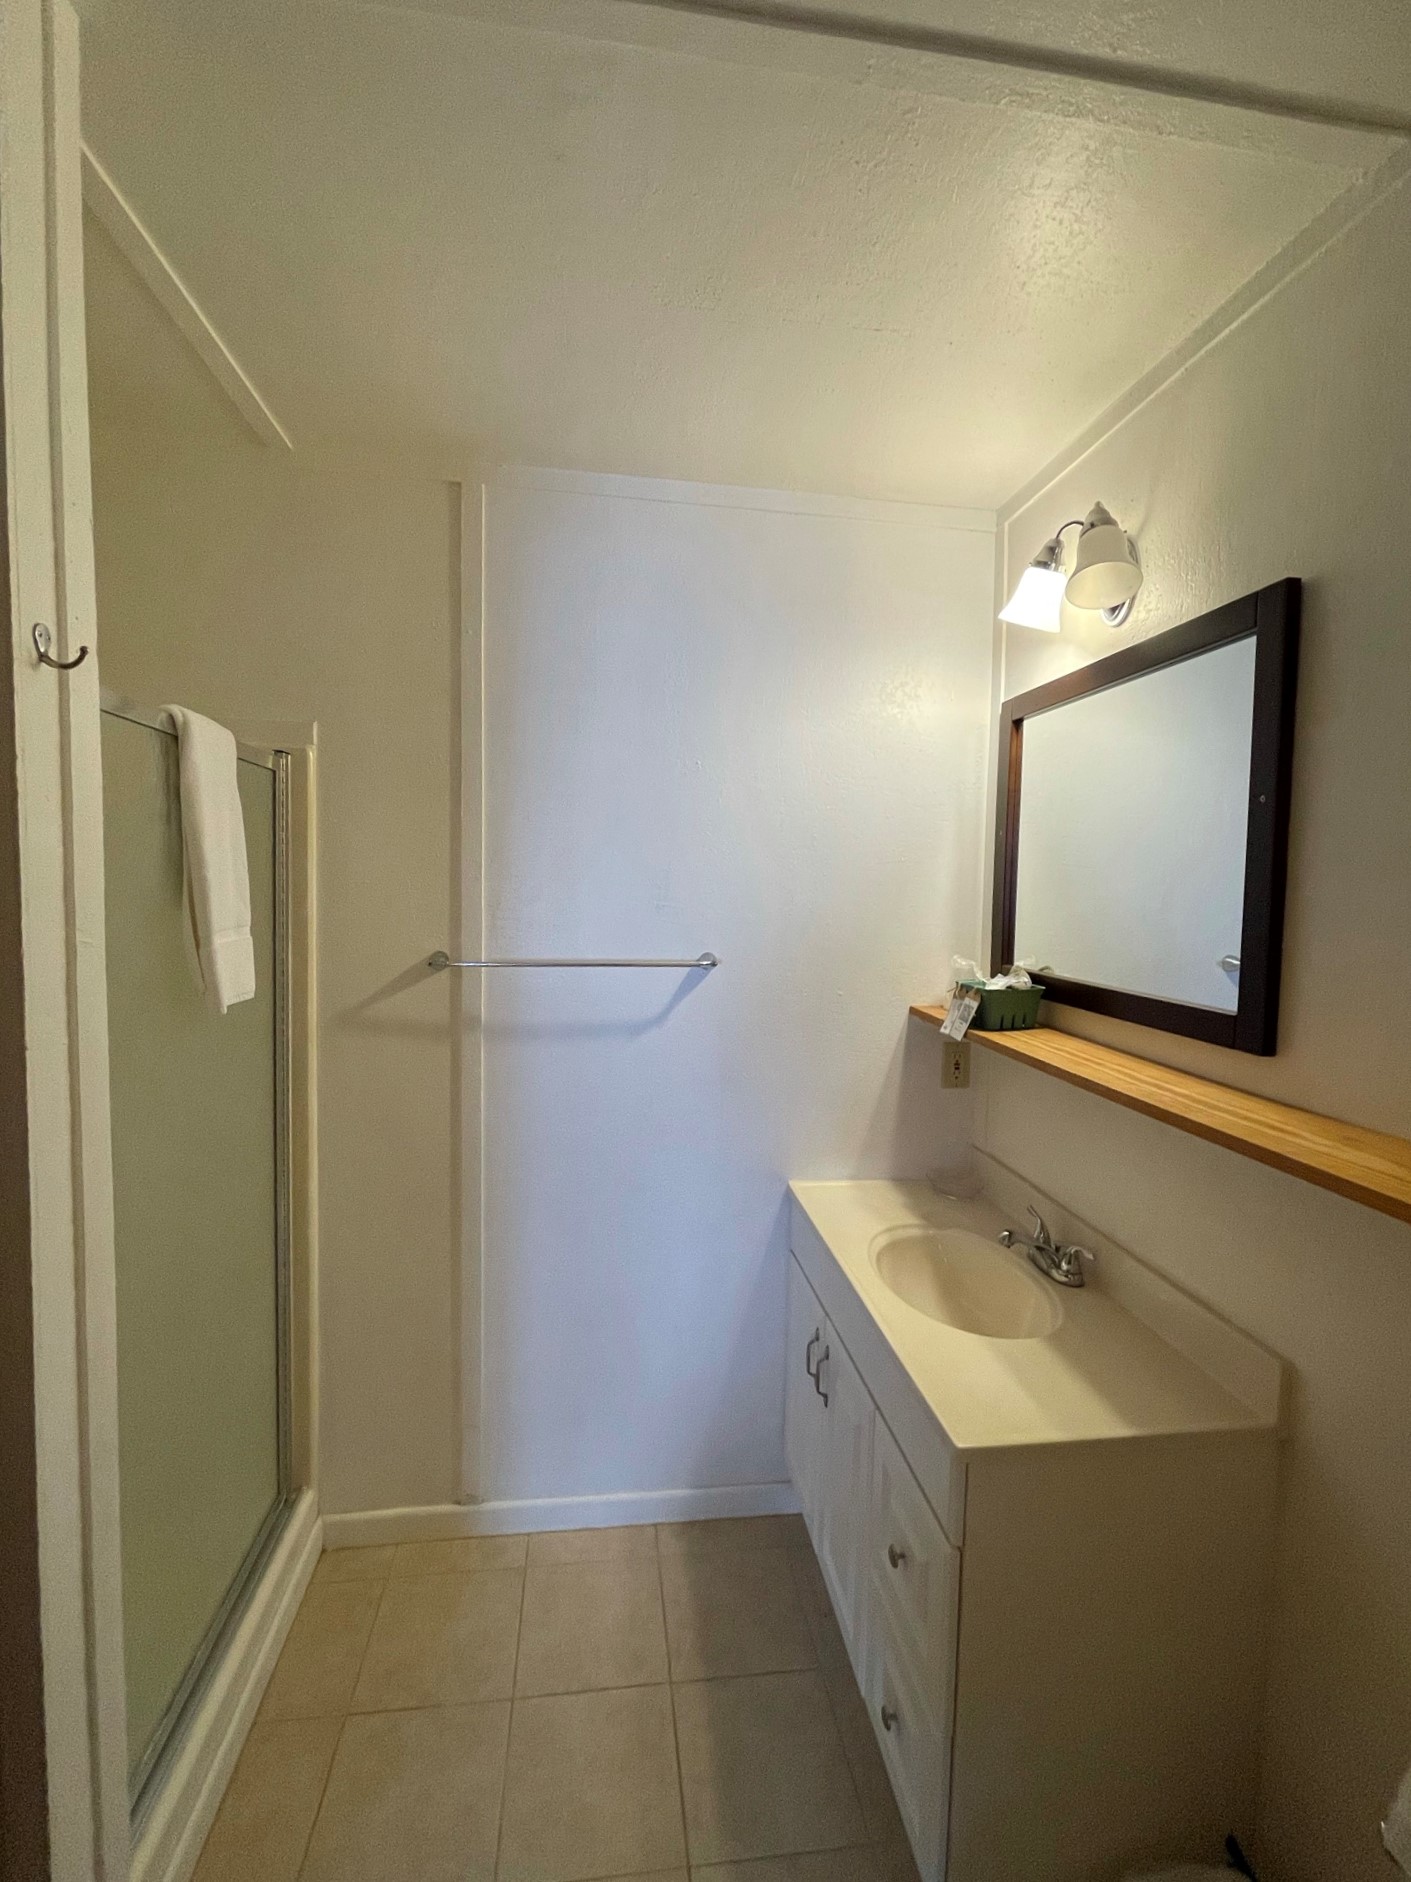                                                 Cleanup's simple in the spotless full bath, which includes a shower stall and clean bath linens!